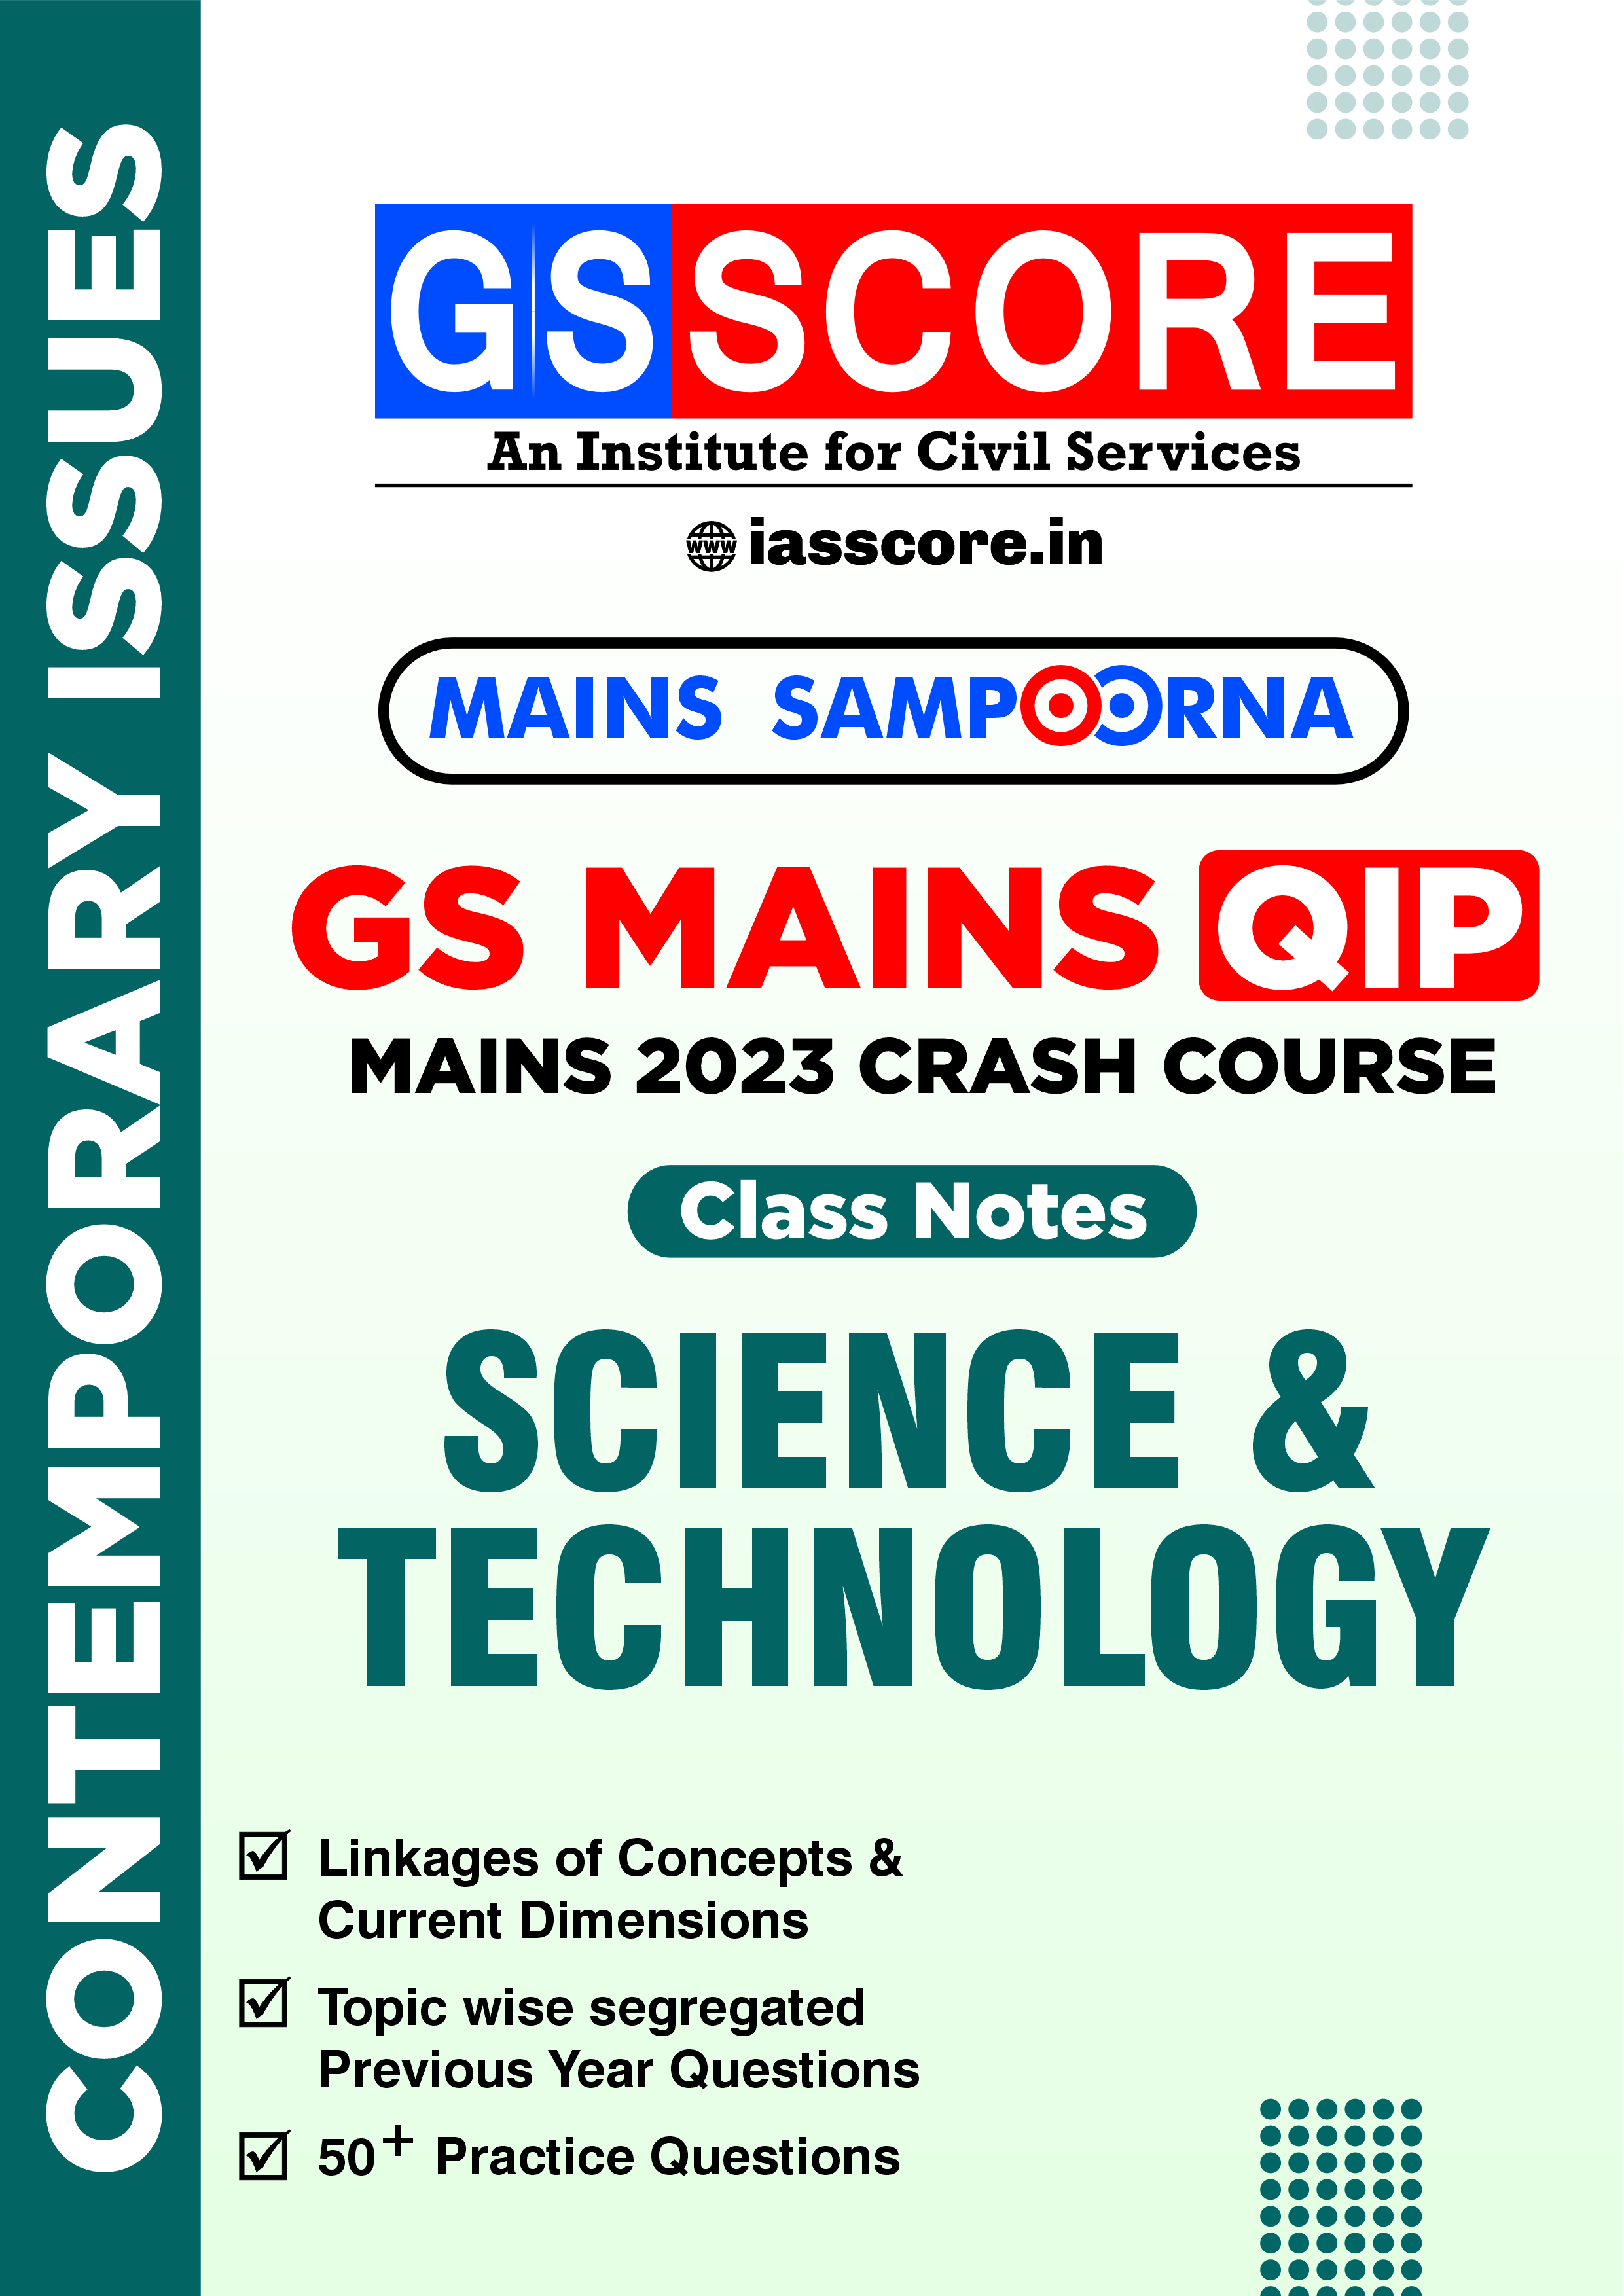 Mains Sampoorna: UPSC Current Affairs Compilation - Science & Technology